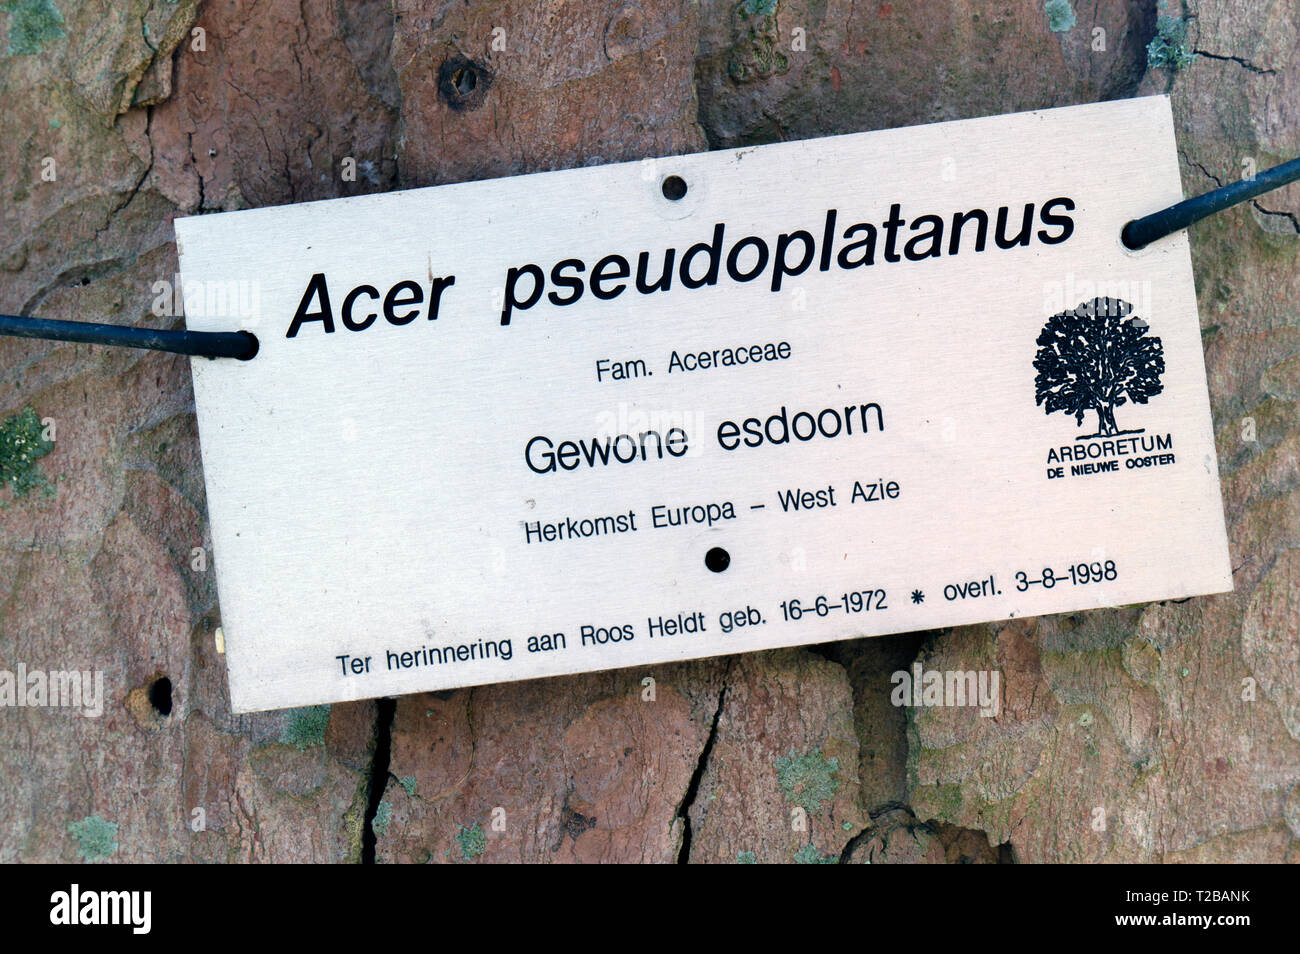 Sign Of A Acer Pseudoplatanus Tree At De Nieuwe Ooster At Amsterdam The Netherlands 2019 Stock Photo